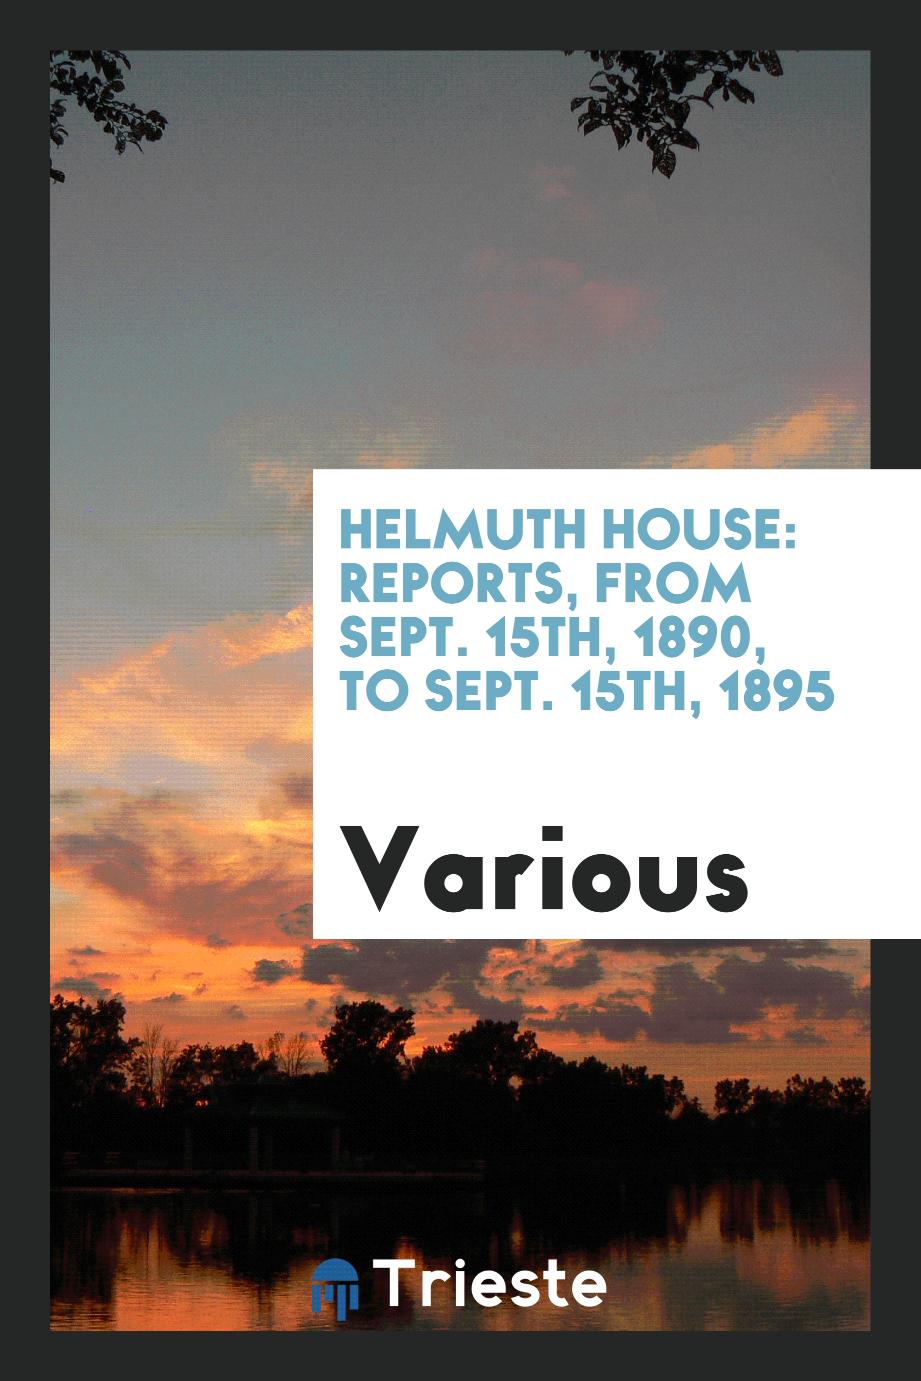 Helmuth House: Reports, From Sept. 15th, 1890, to Sept. 15th, 1895